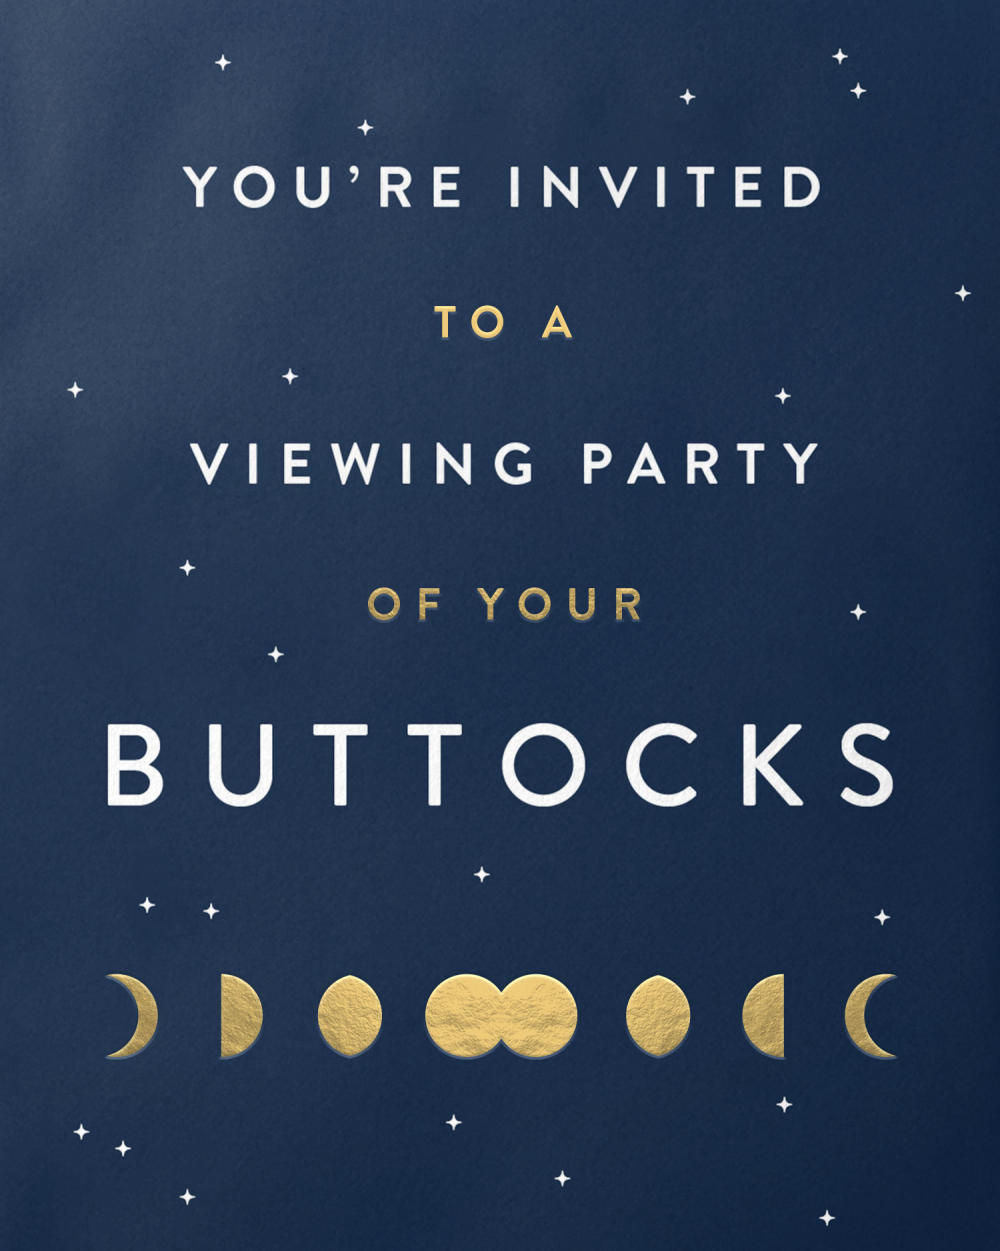 You're invited to a viewing party of your buttocks.